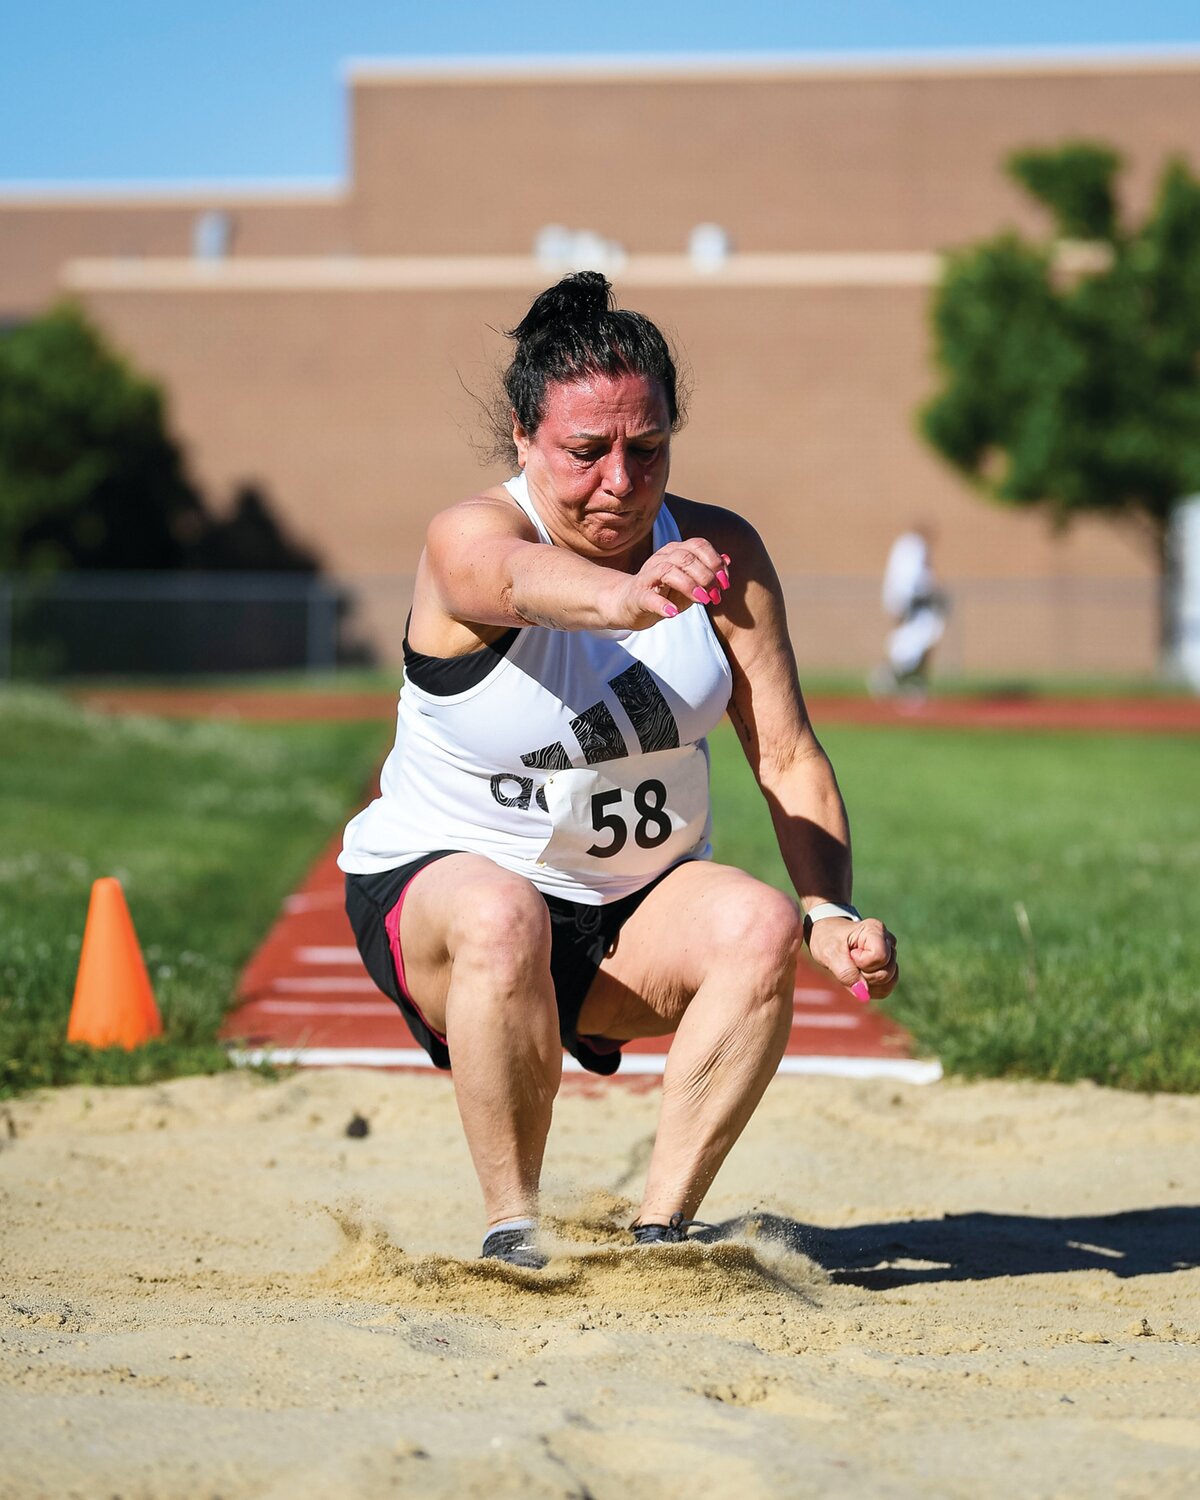 Nancy Scudero lands during her first attempt at the long jump.